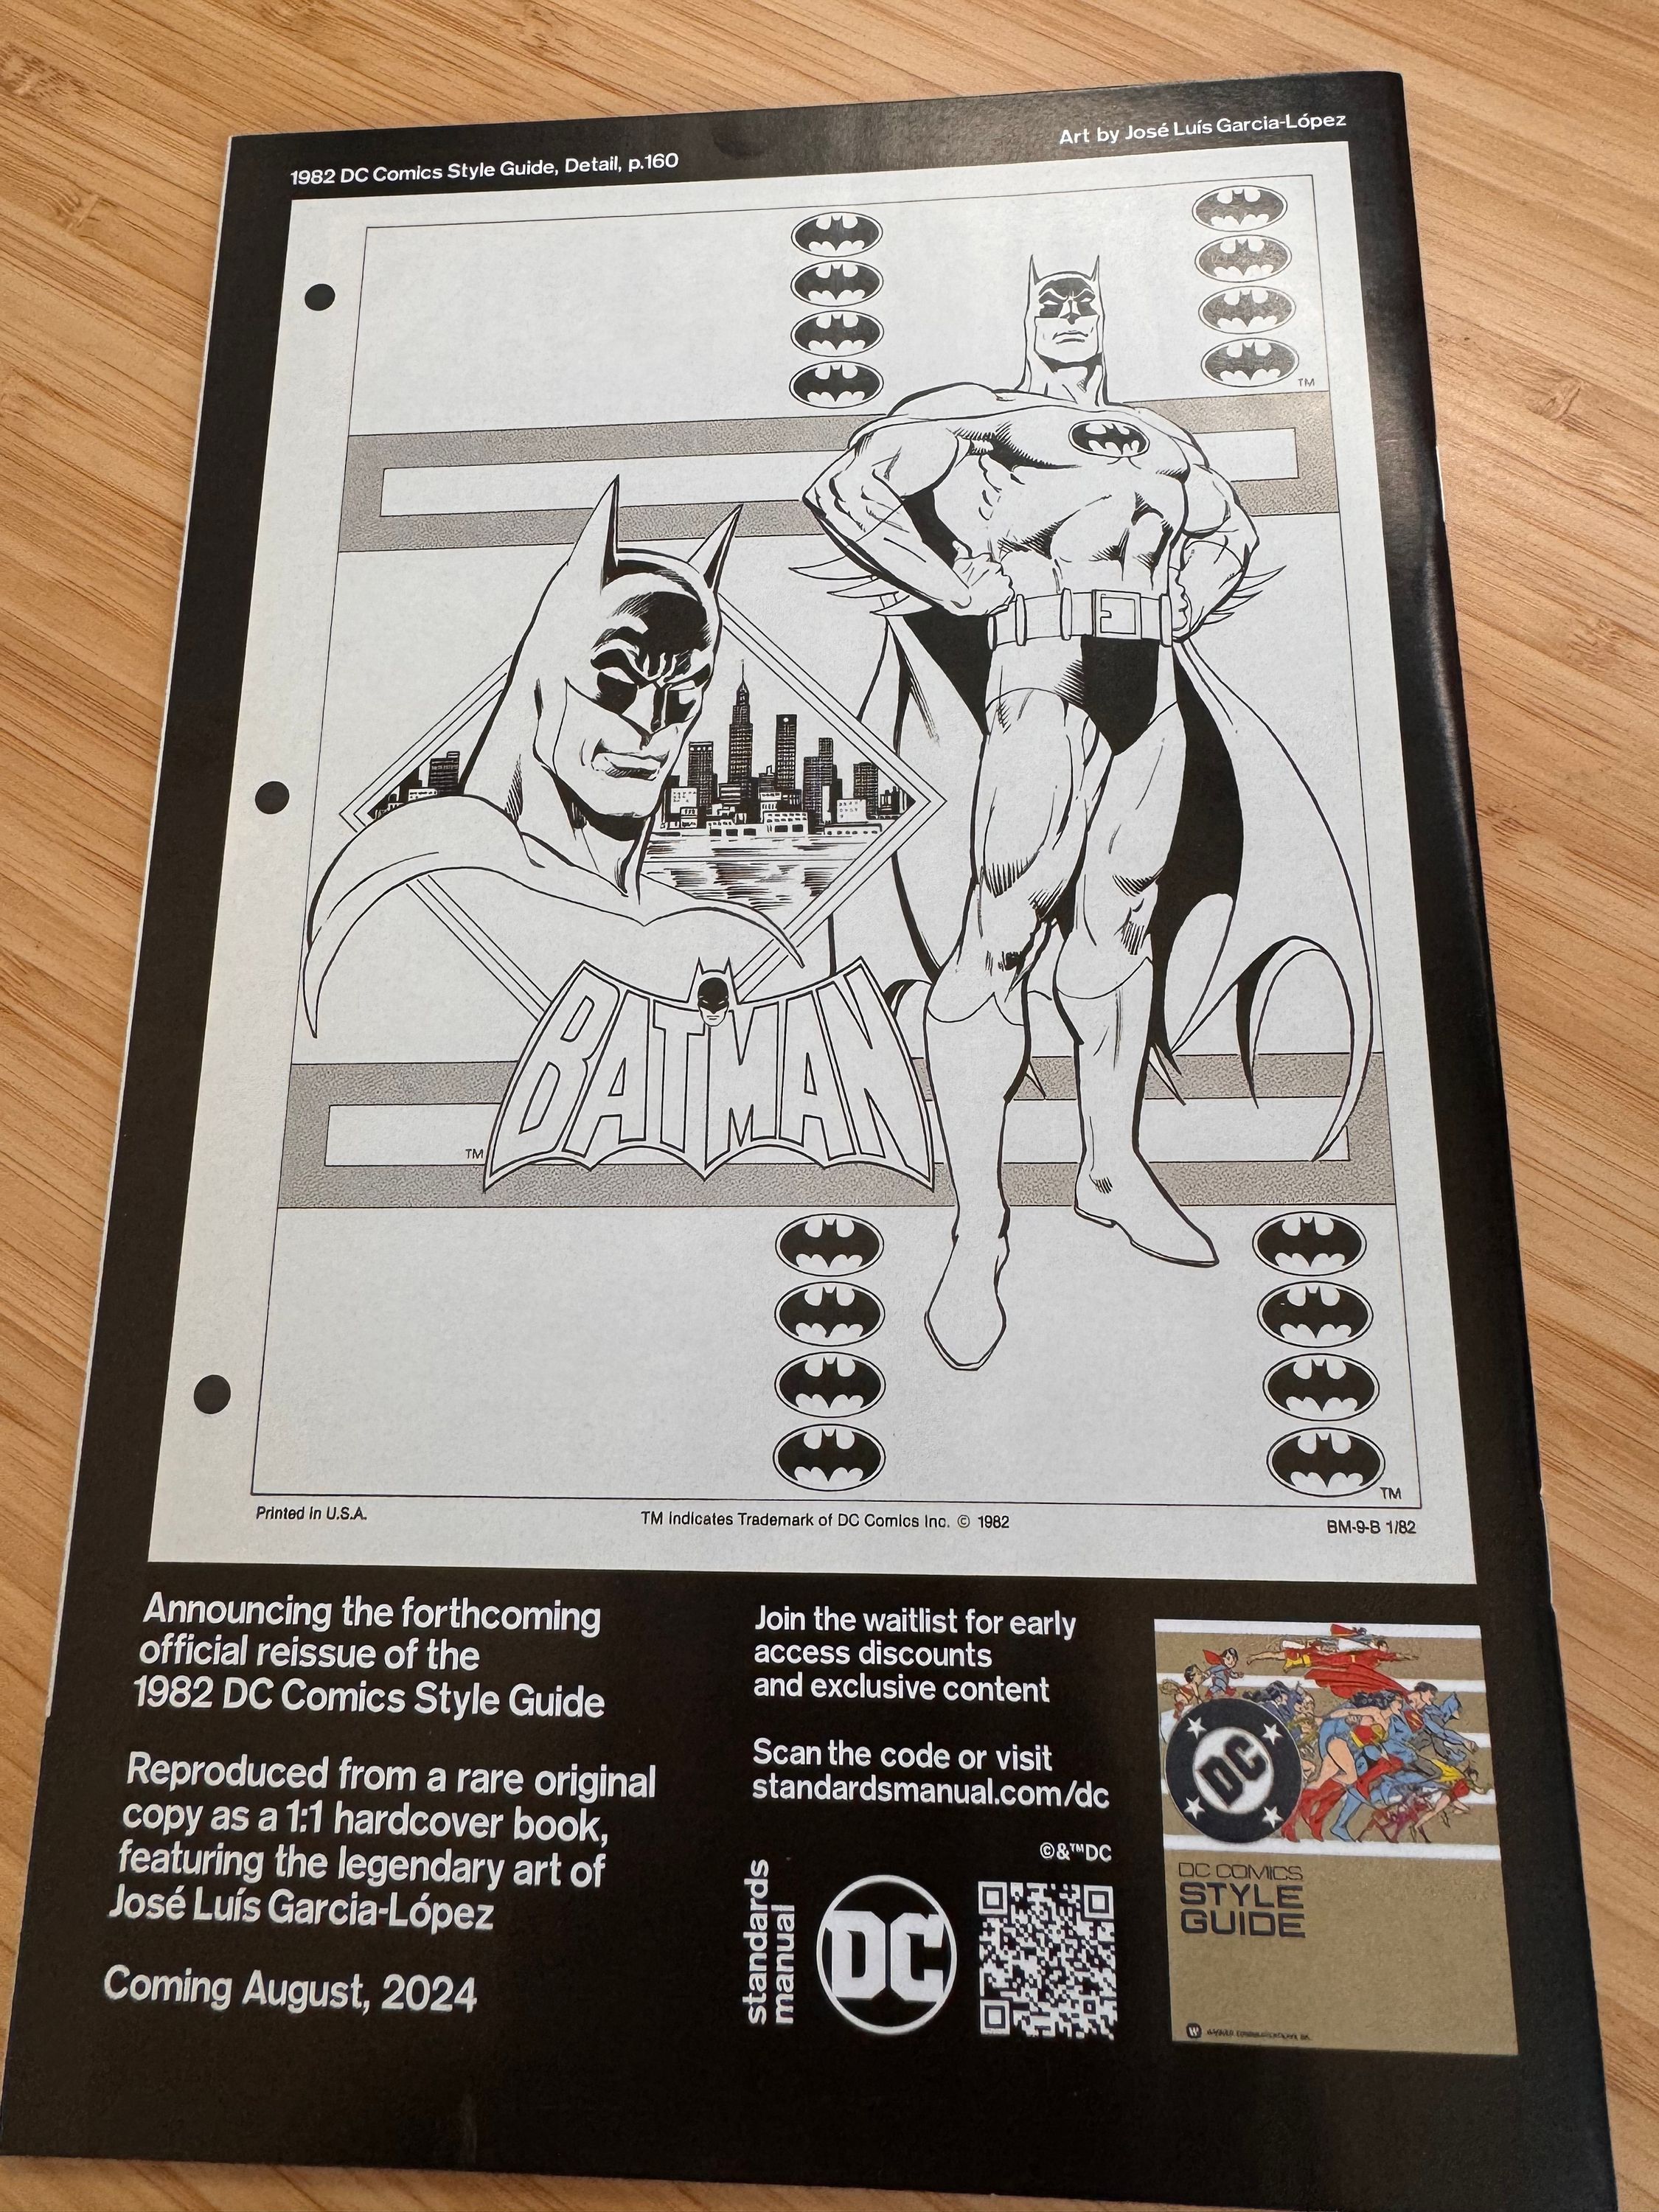 advertisement for the reissue of the 1982 DC Comics Style Guide. Featuring art by José Luís Garcia-López depicting Batman standing with his hands on his hips; plus a close up of Batman’s face. Multiple Batman logos and an old Batman wordmark.